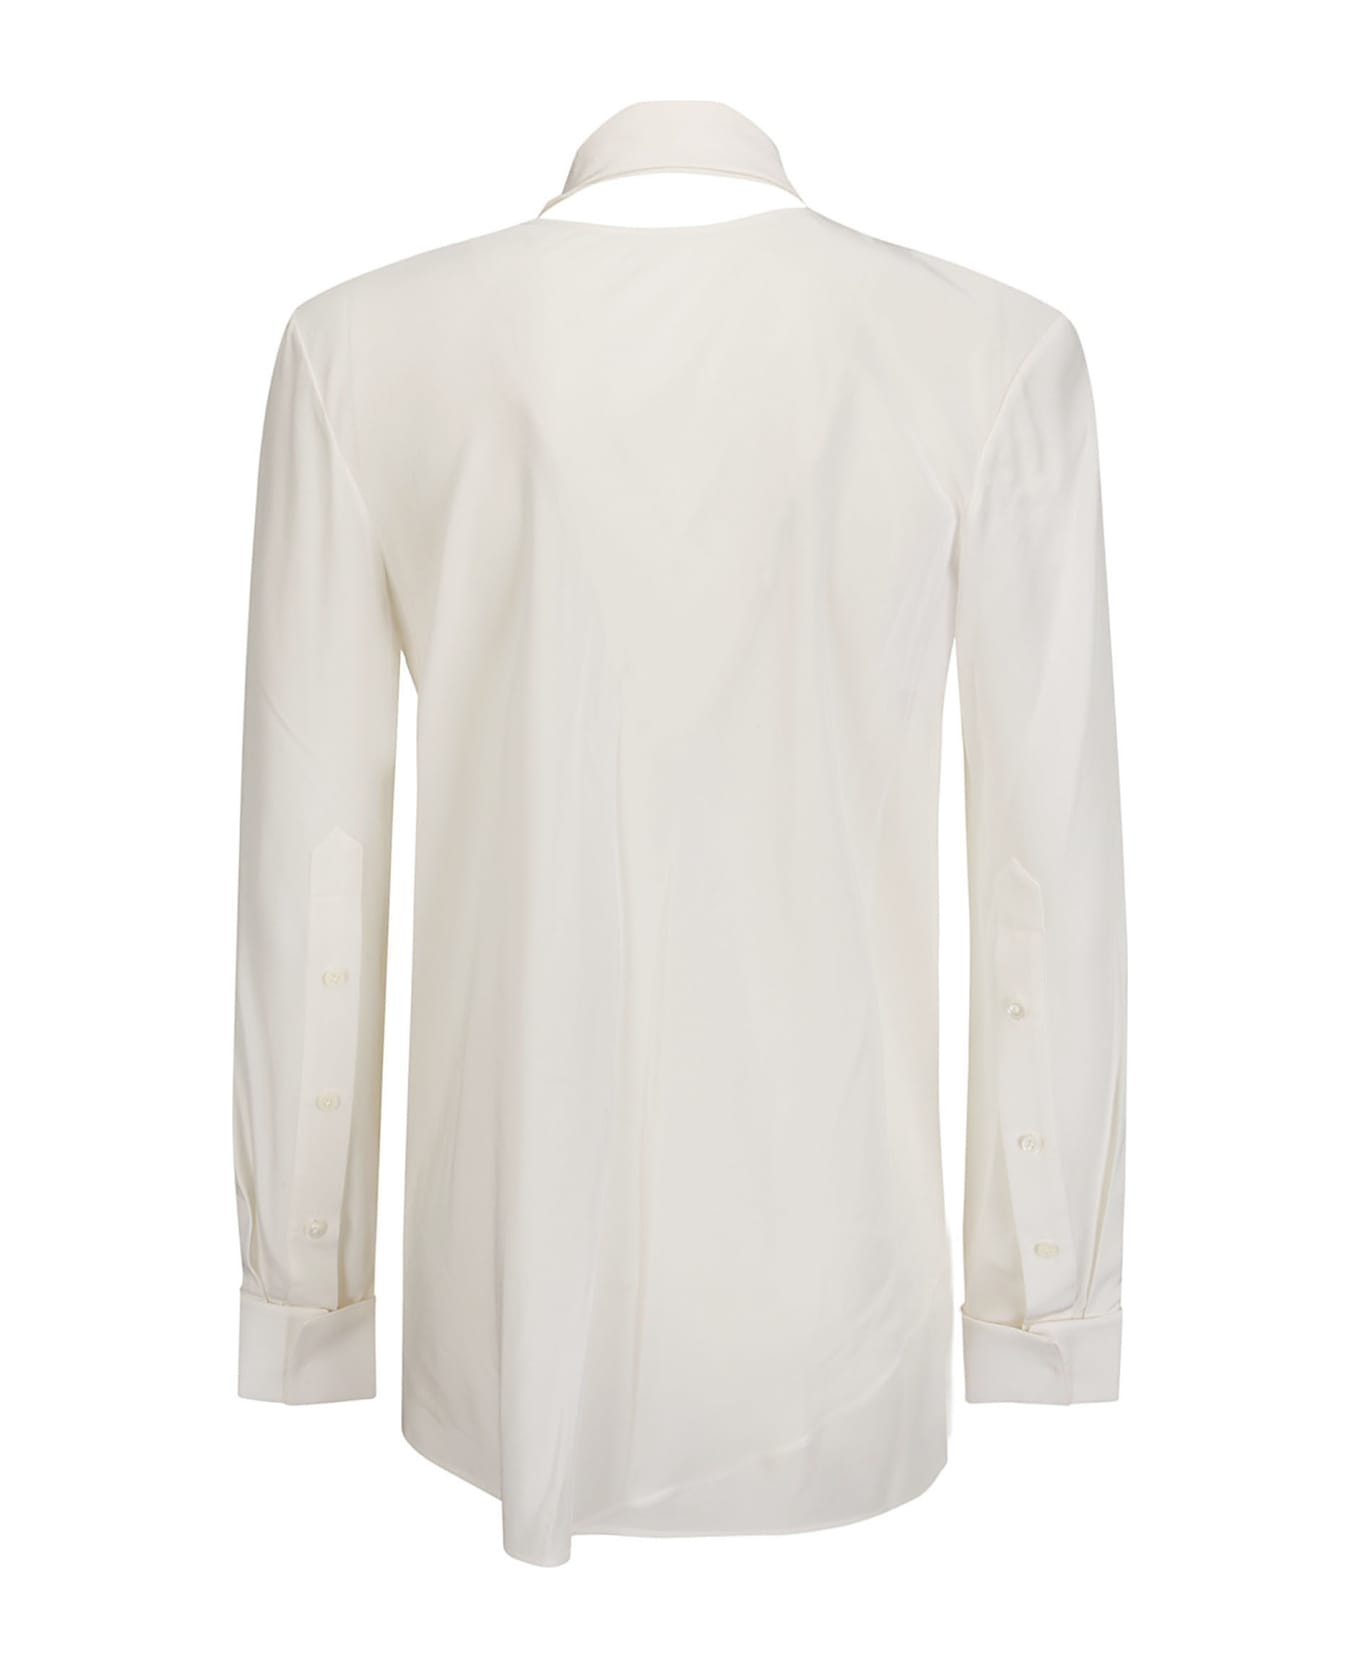 Helmut Lang Scarf Top Rev - WHITE ブラウス